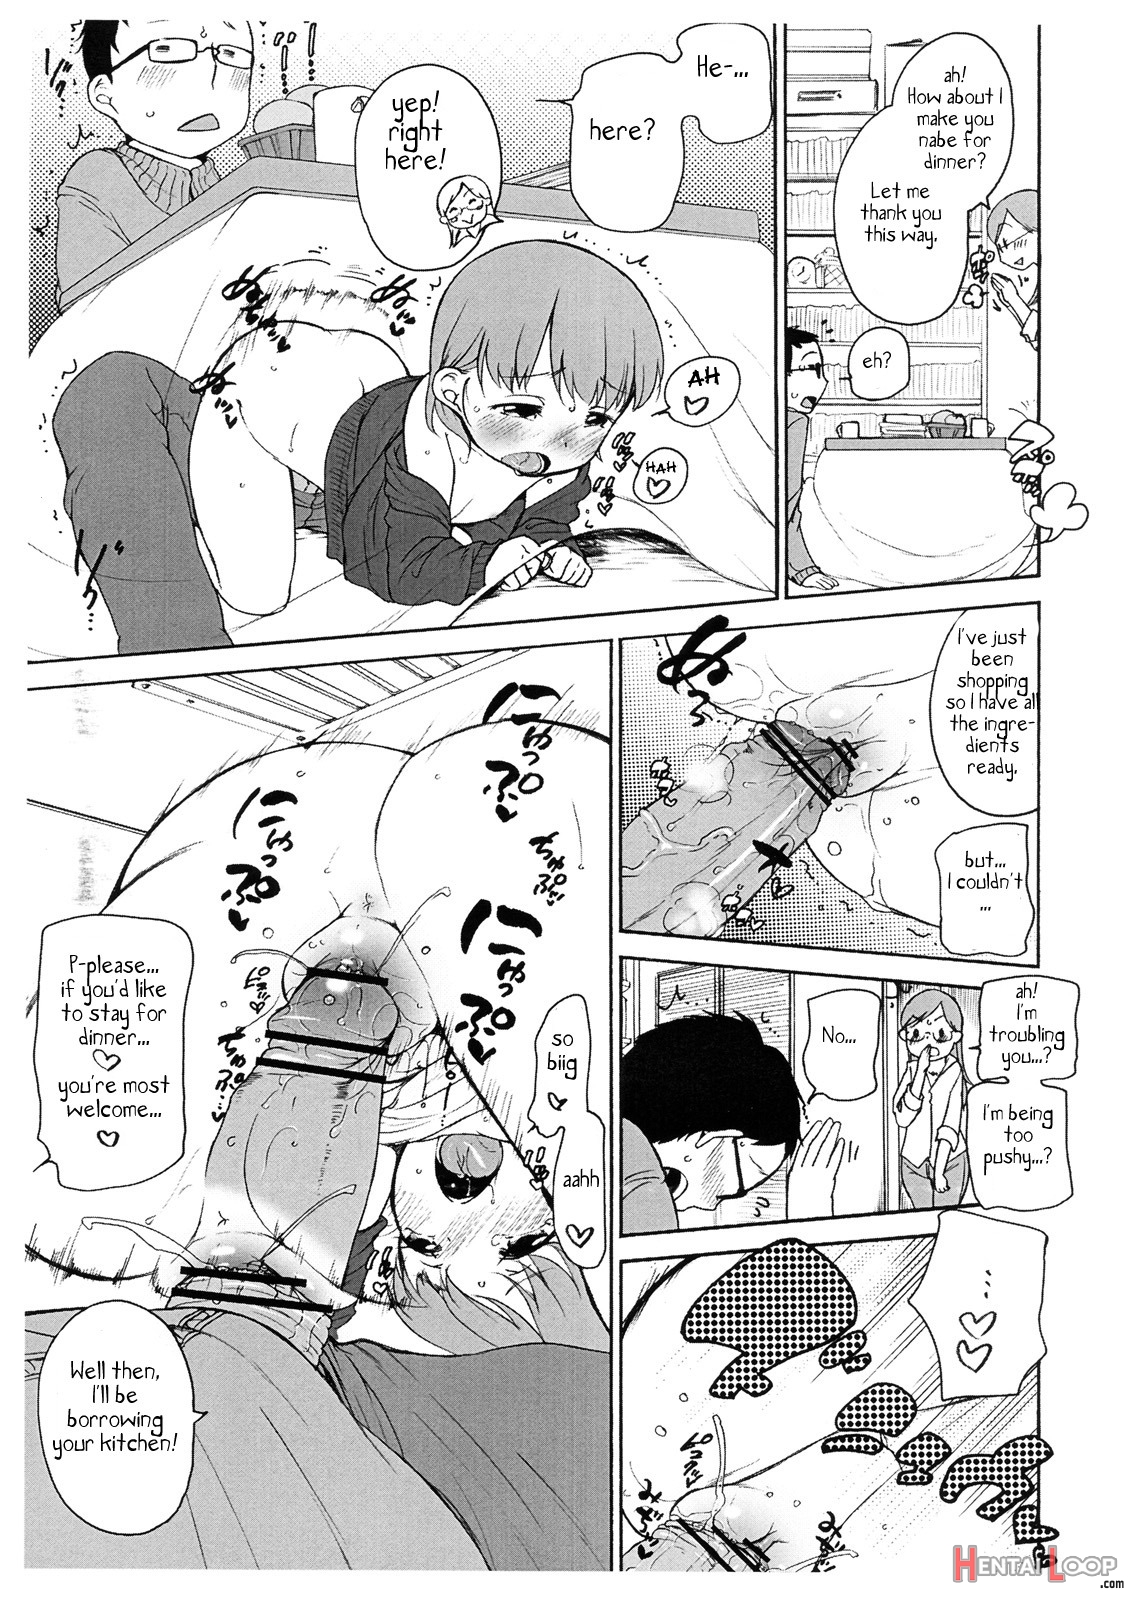 Lala And Onii-chan's Winter Vacation page 6